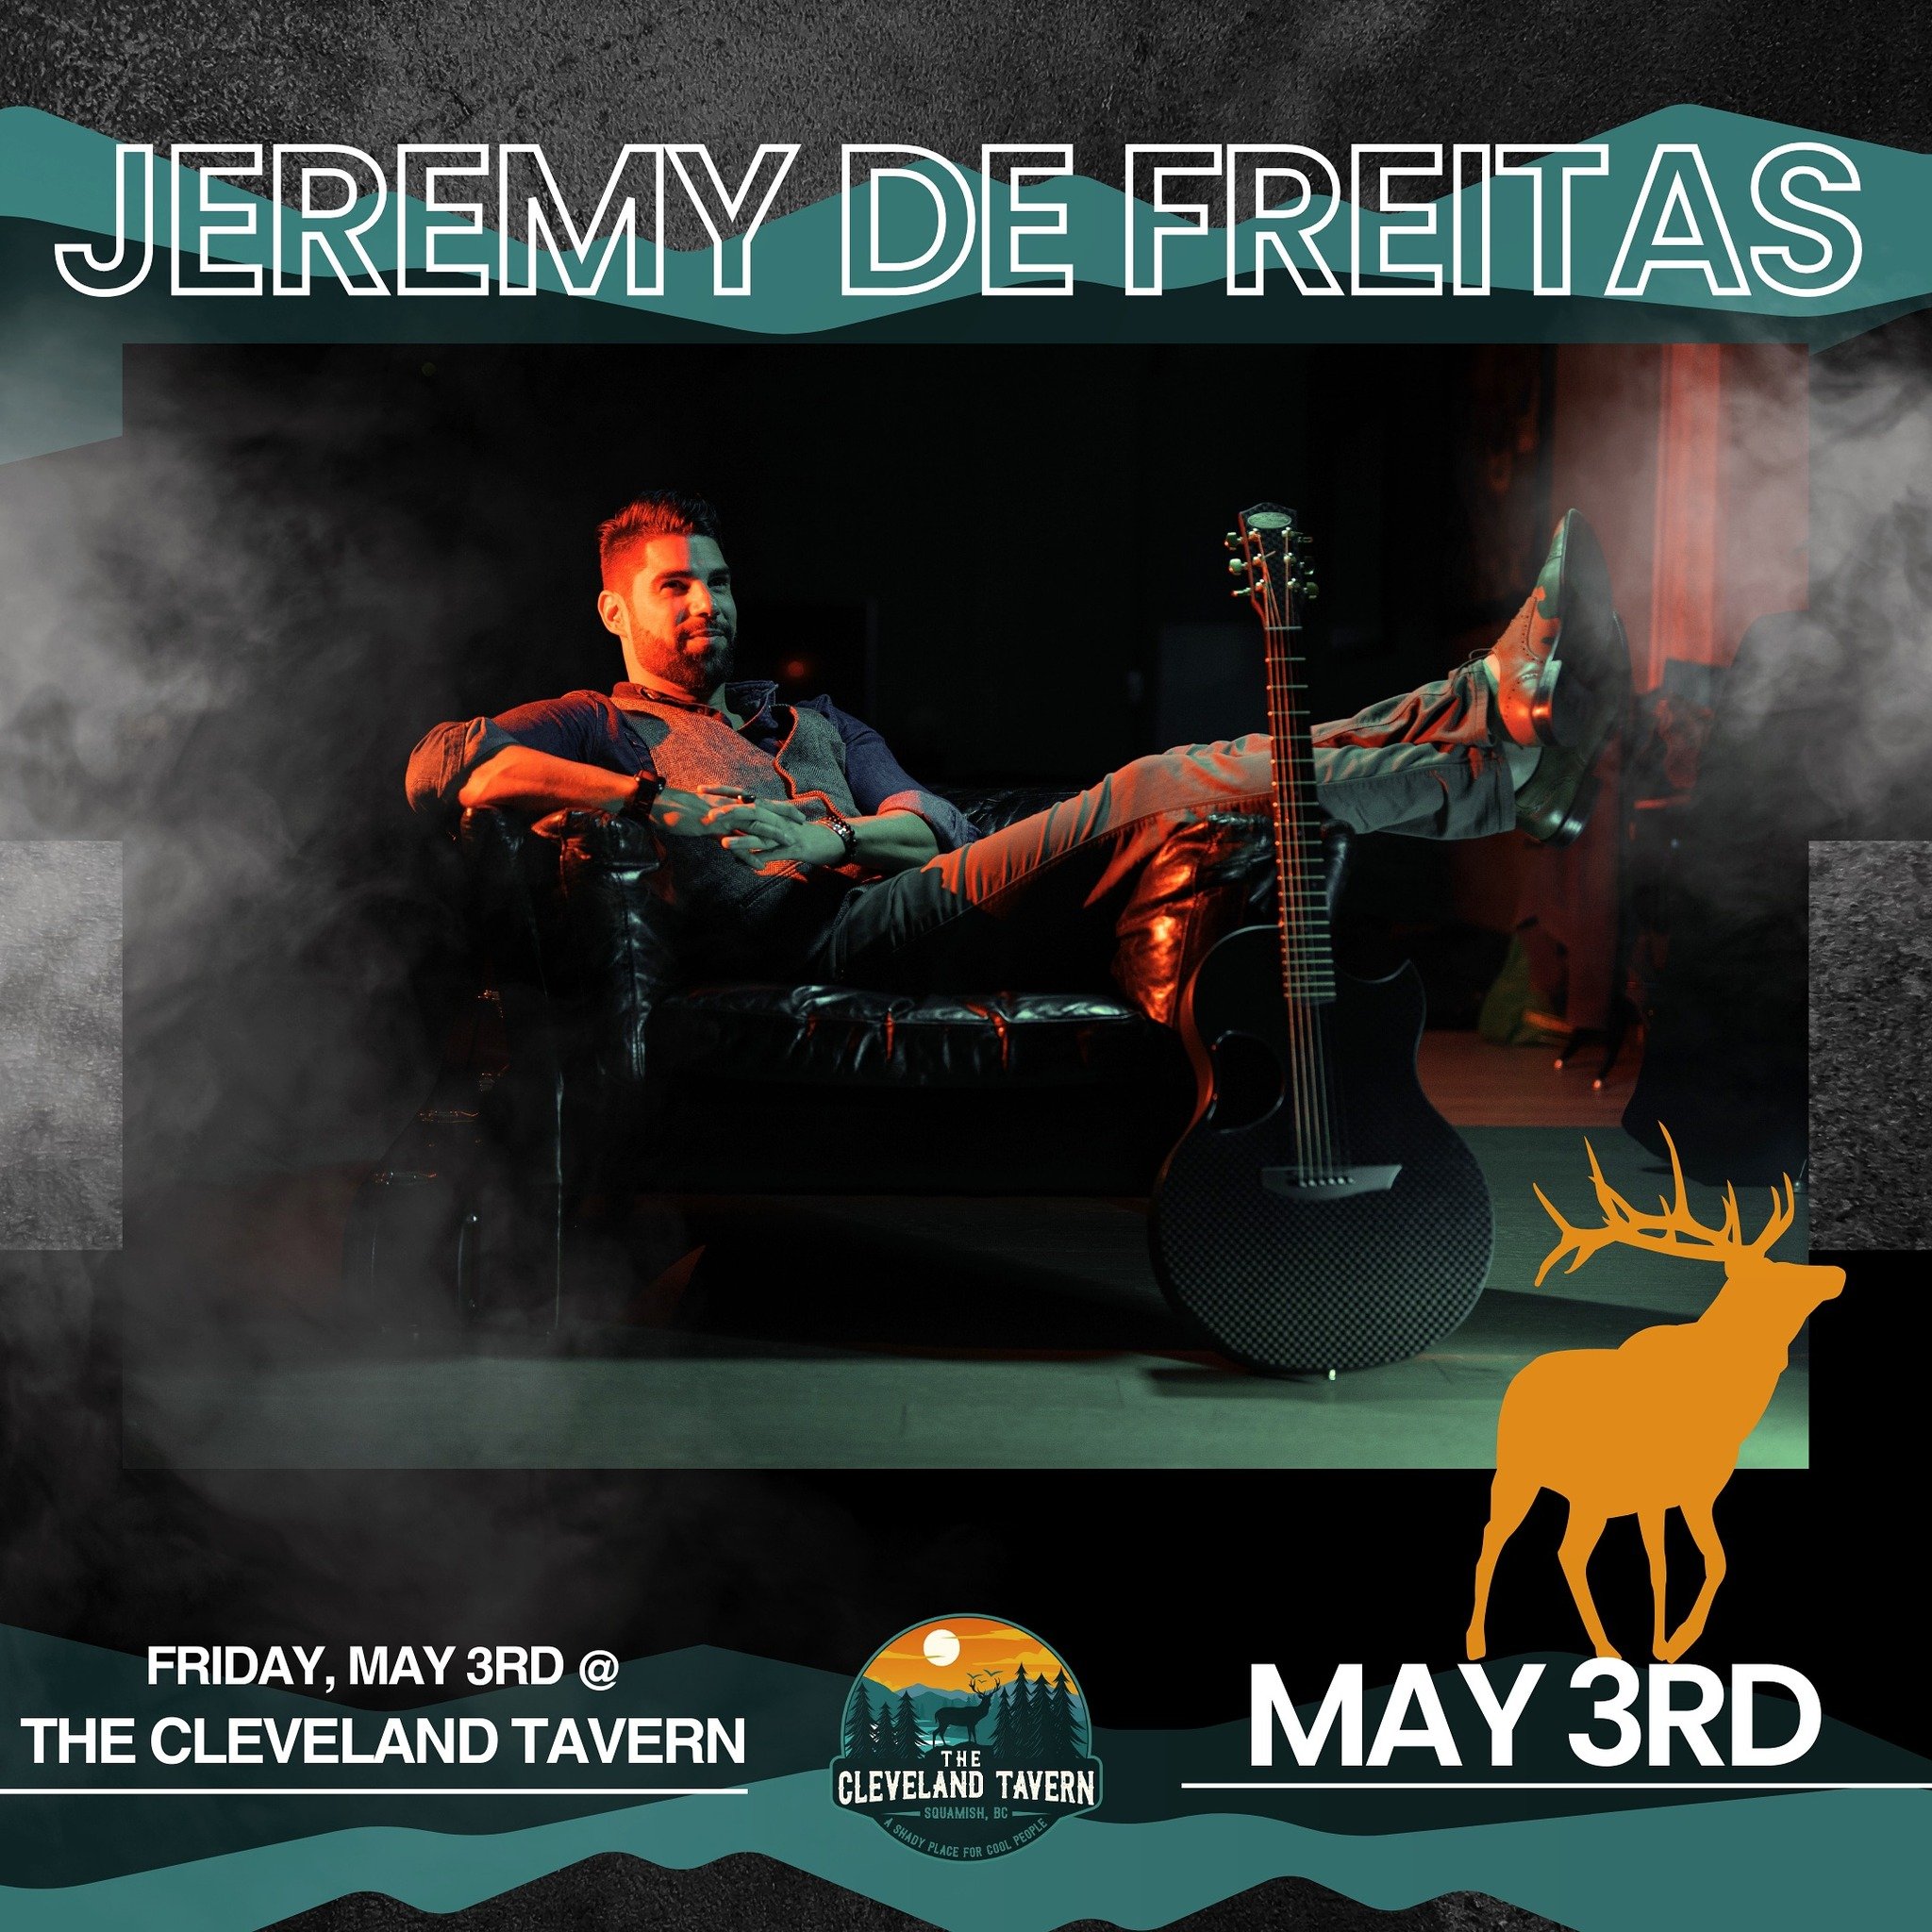 Join us on Friday, May 3rd for a lively night with our friend @jdplaysmusic 🔥 Music starts at 8pm!!